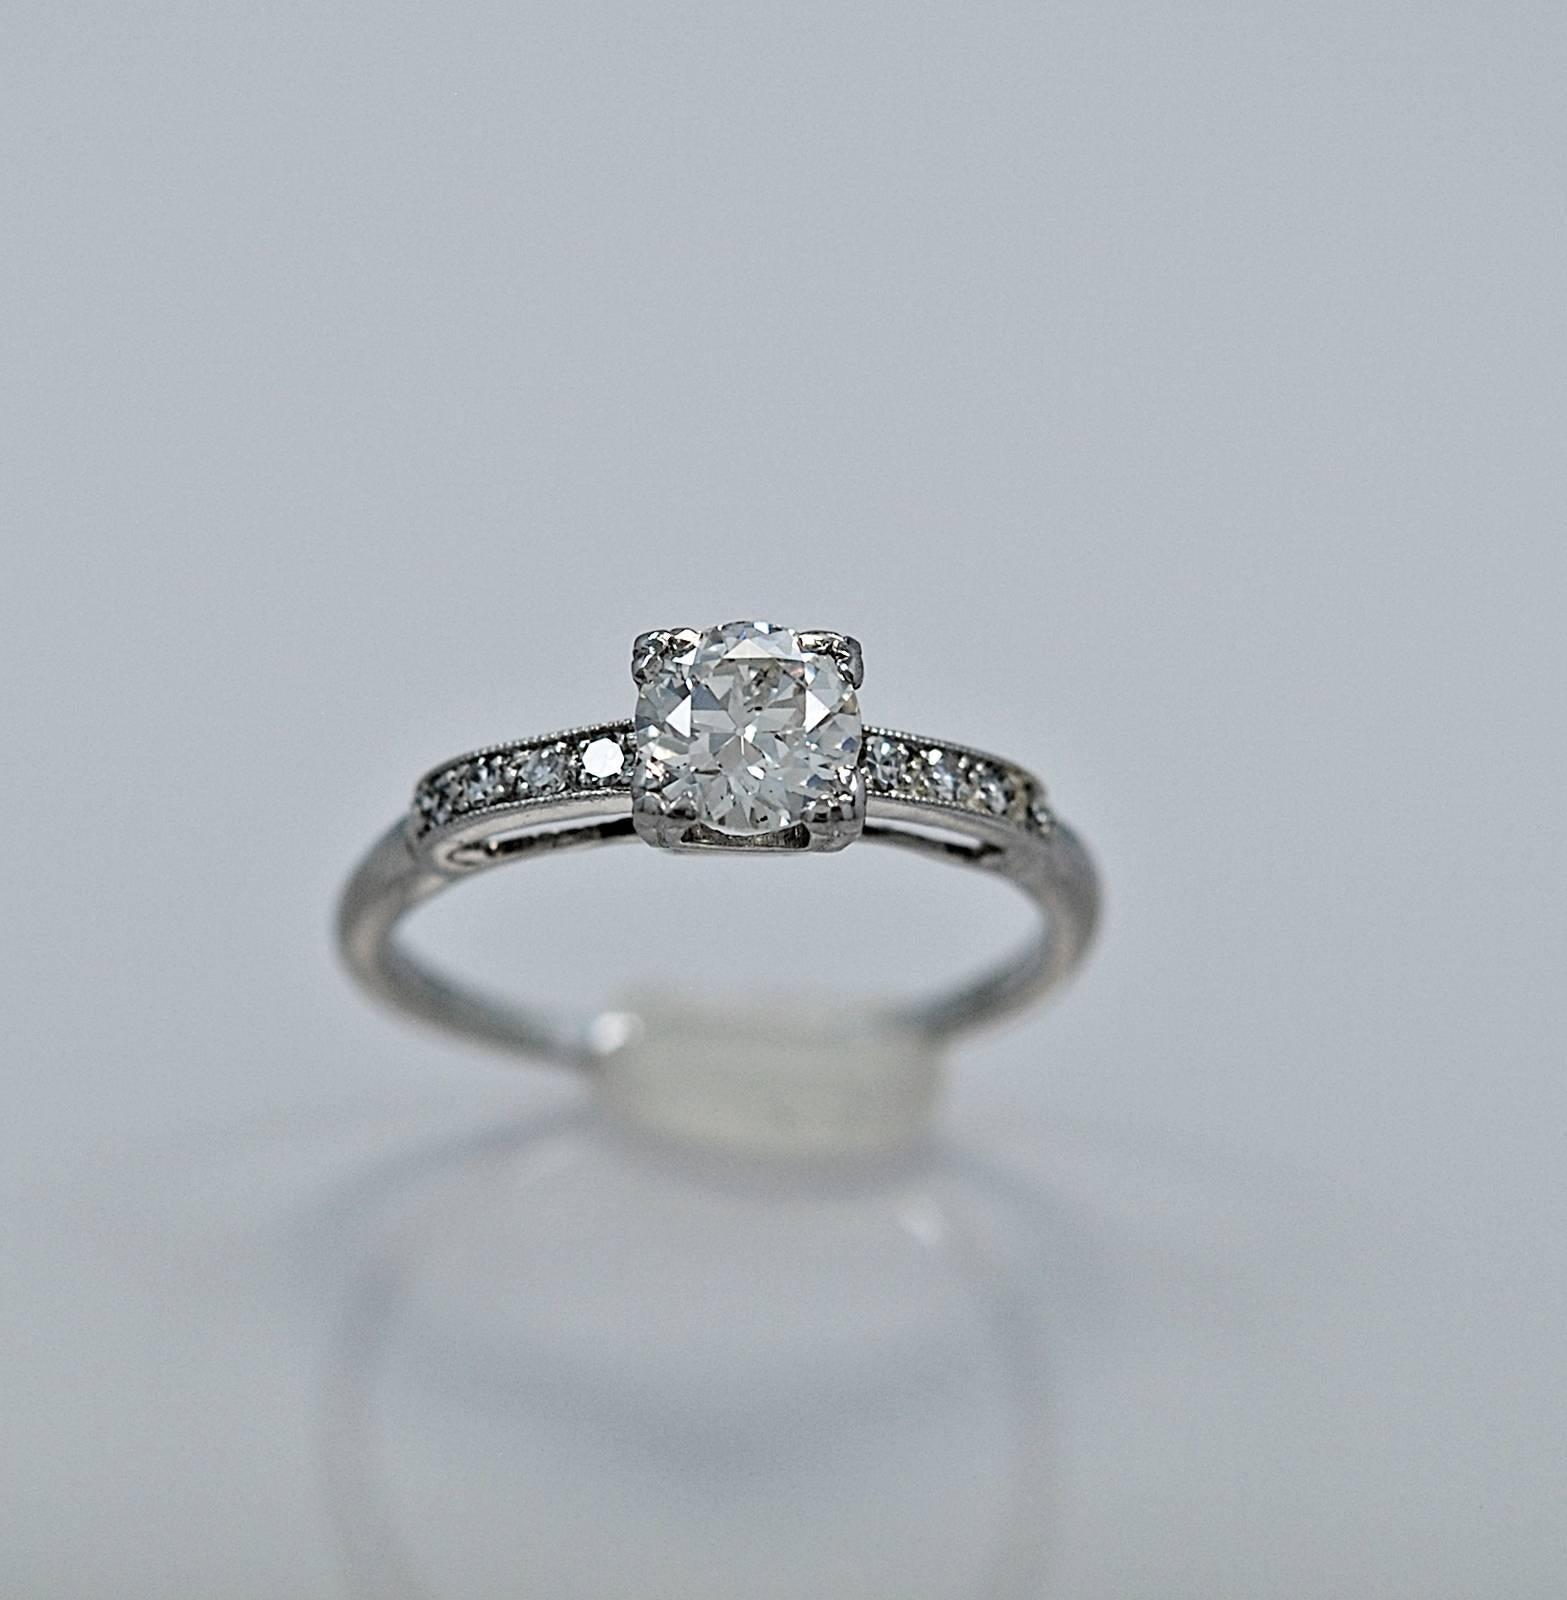 Lovely Art Deco platinum & diamond engagement ring featuring a .54ct. apx. diamond of SI2 clarity and H color. The diamond melee weighing .08ct. apx. T.W. adds a touch of elegance to this classic style engagement ring. Very dainty and feminine!